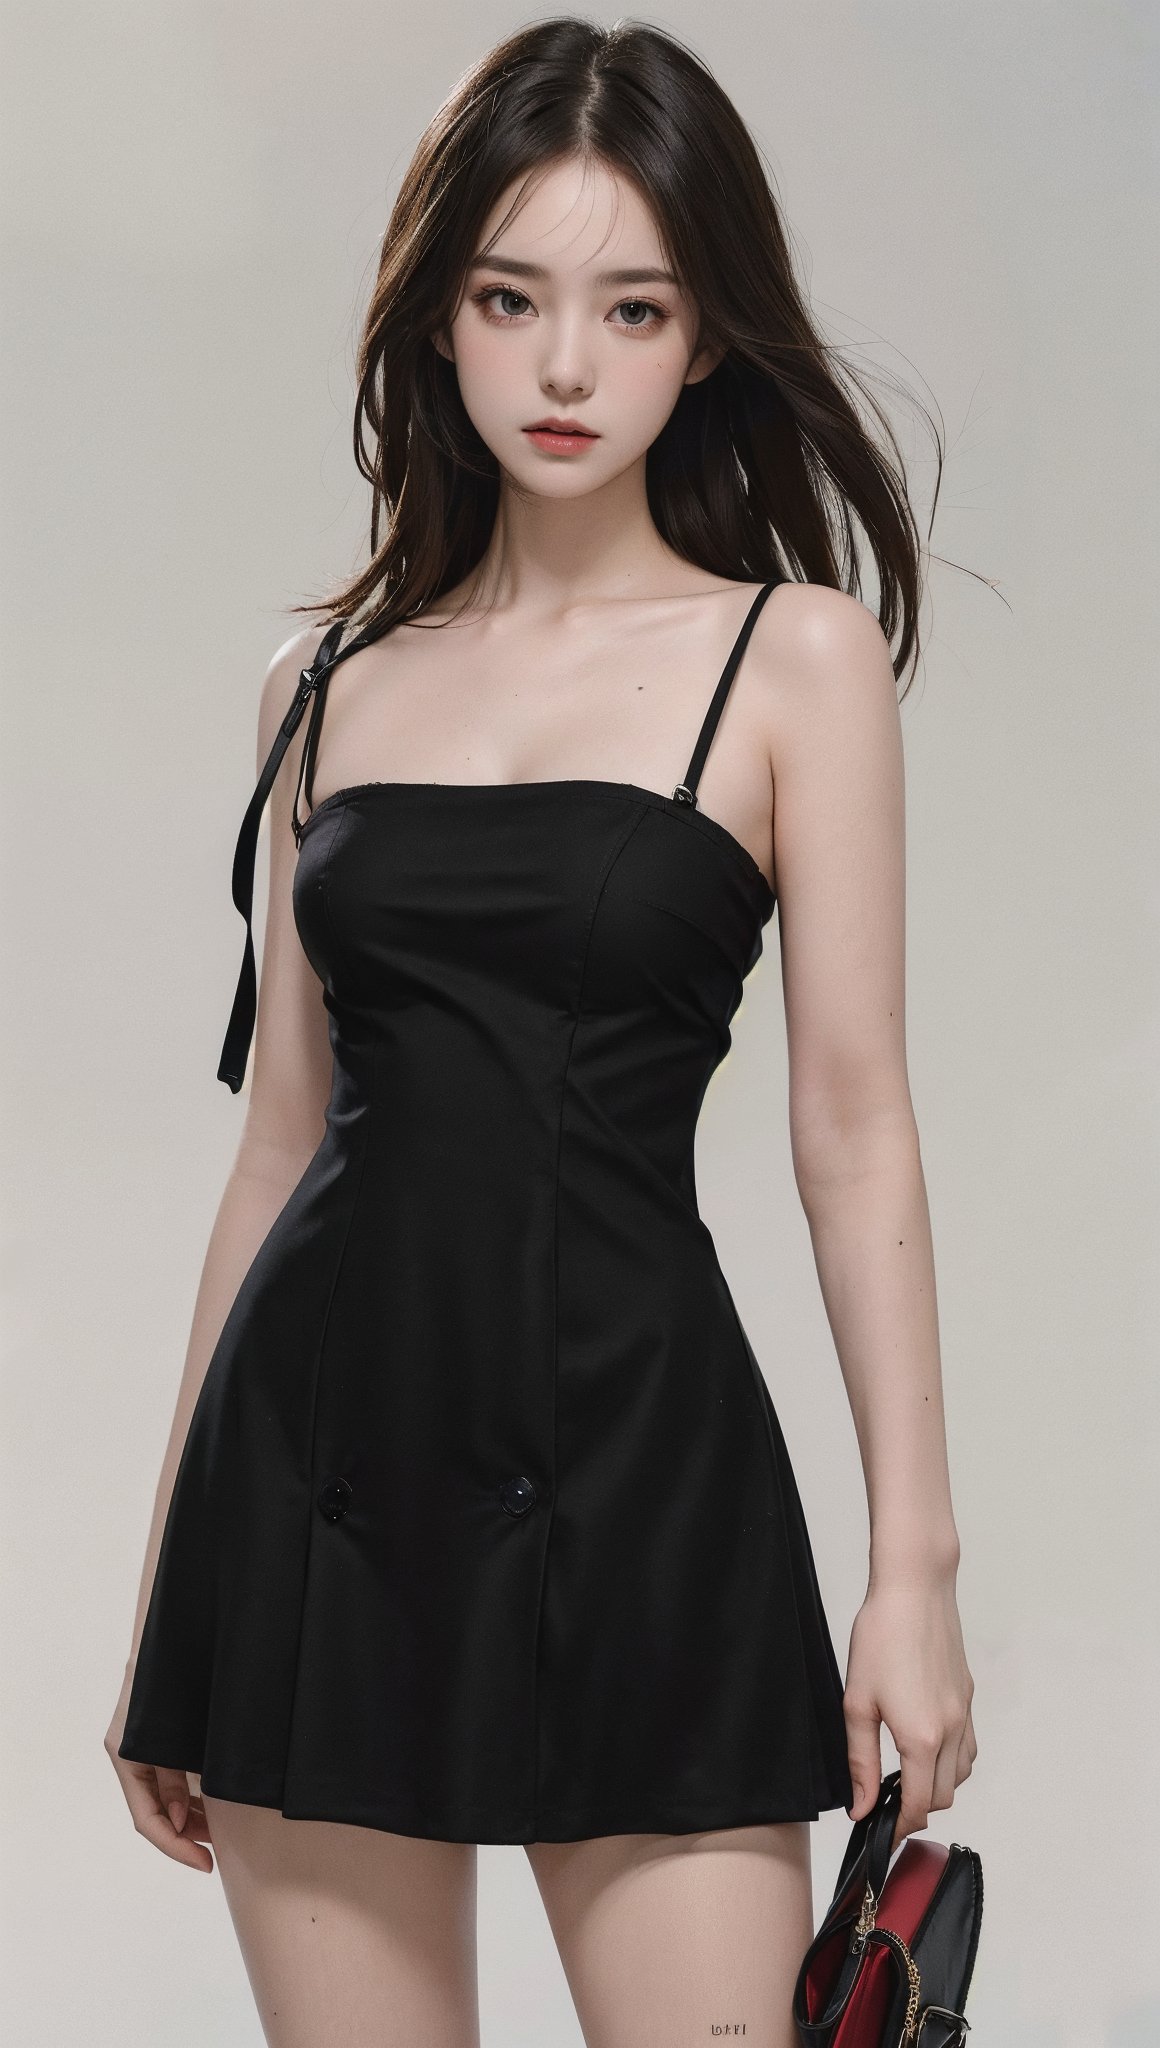 8k, best quality, masterpiece, realistic, ultra detail, photo realistic, Increase quality, look at viewer, soft expression, simple_background, 2 strap black short dress,fashion